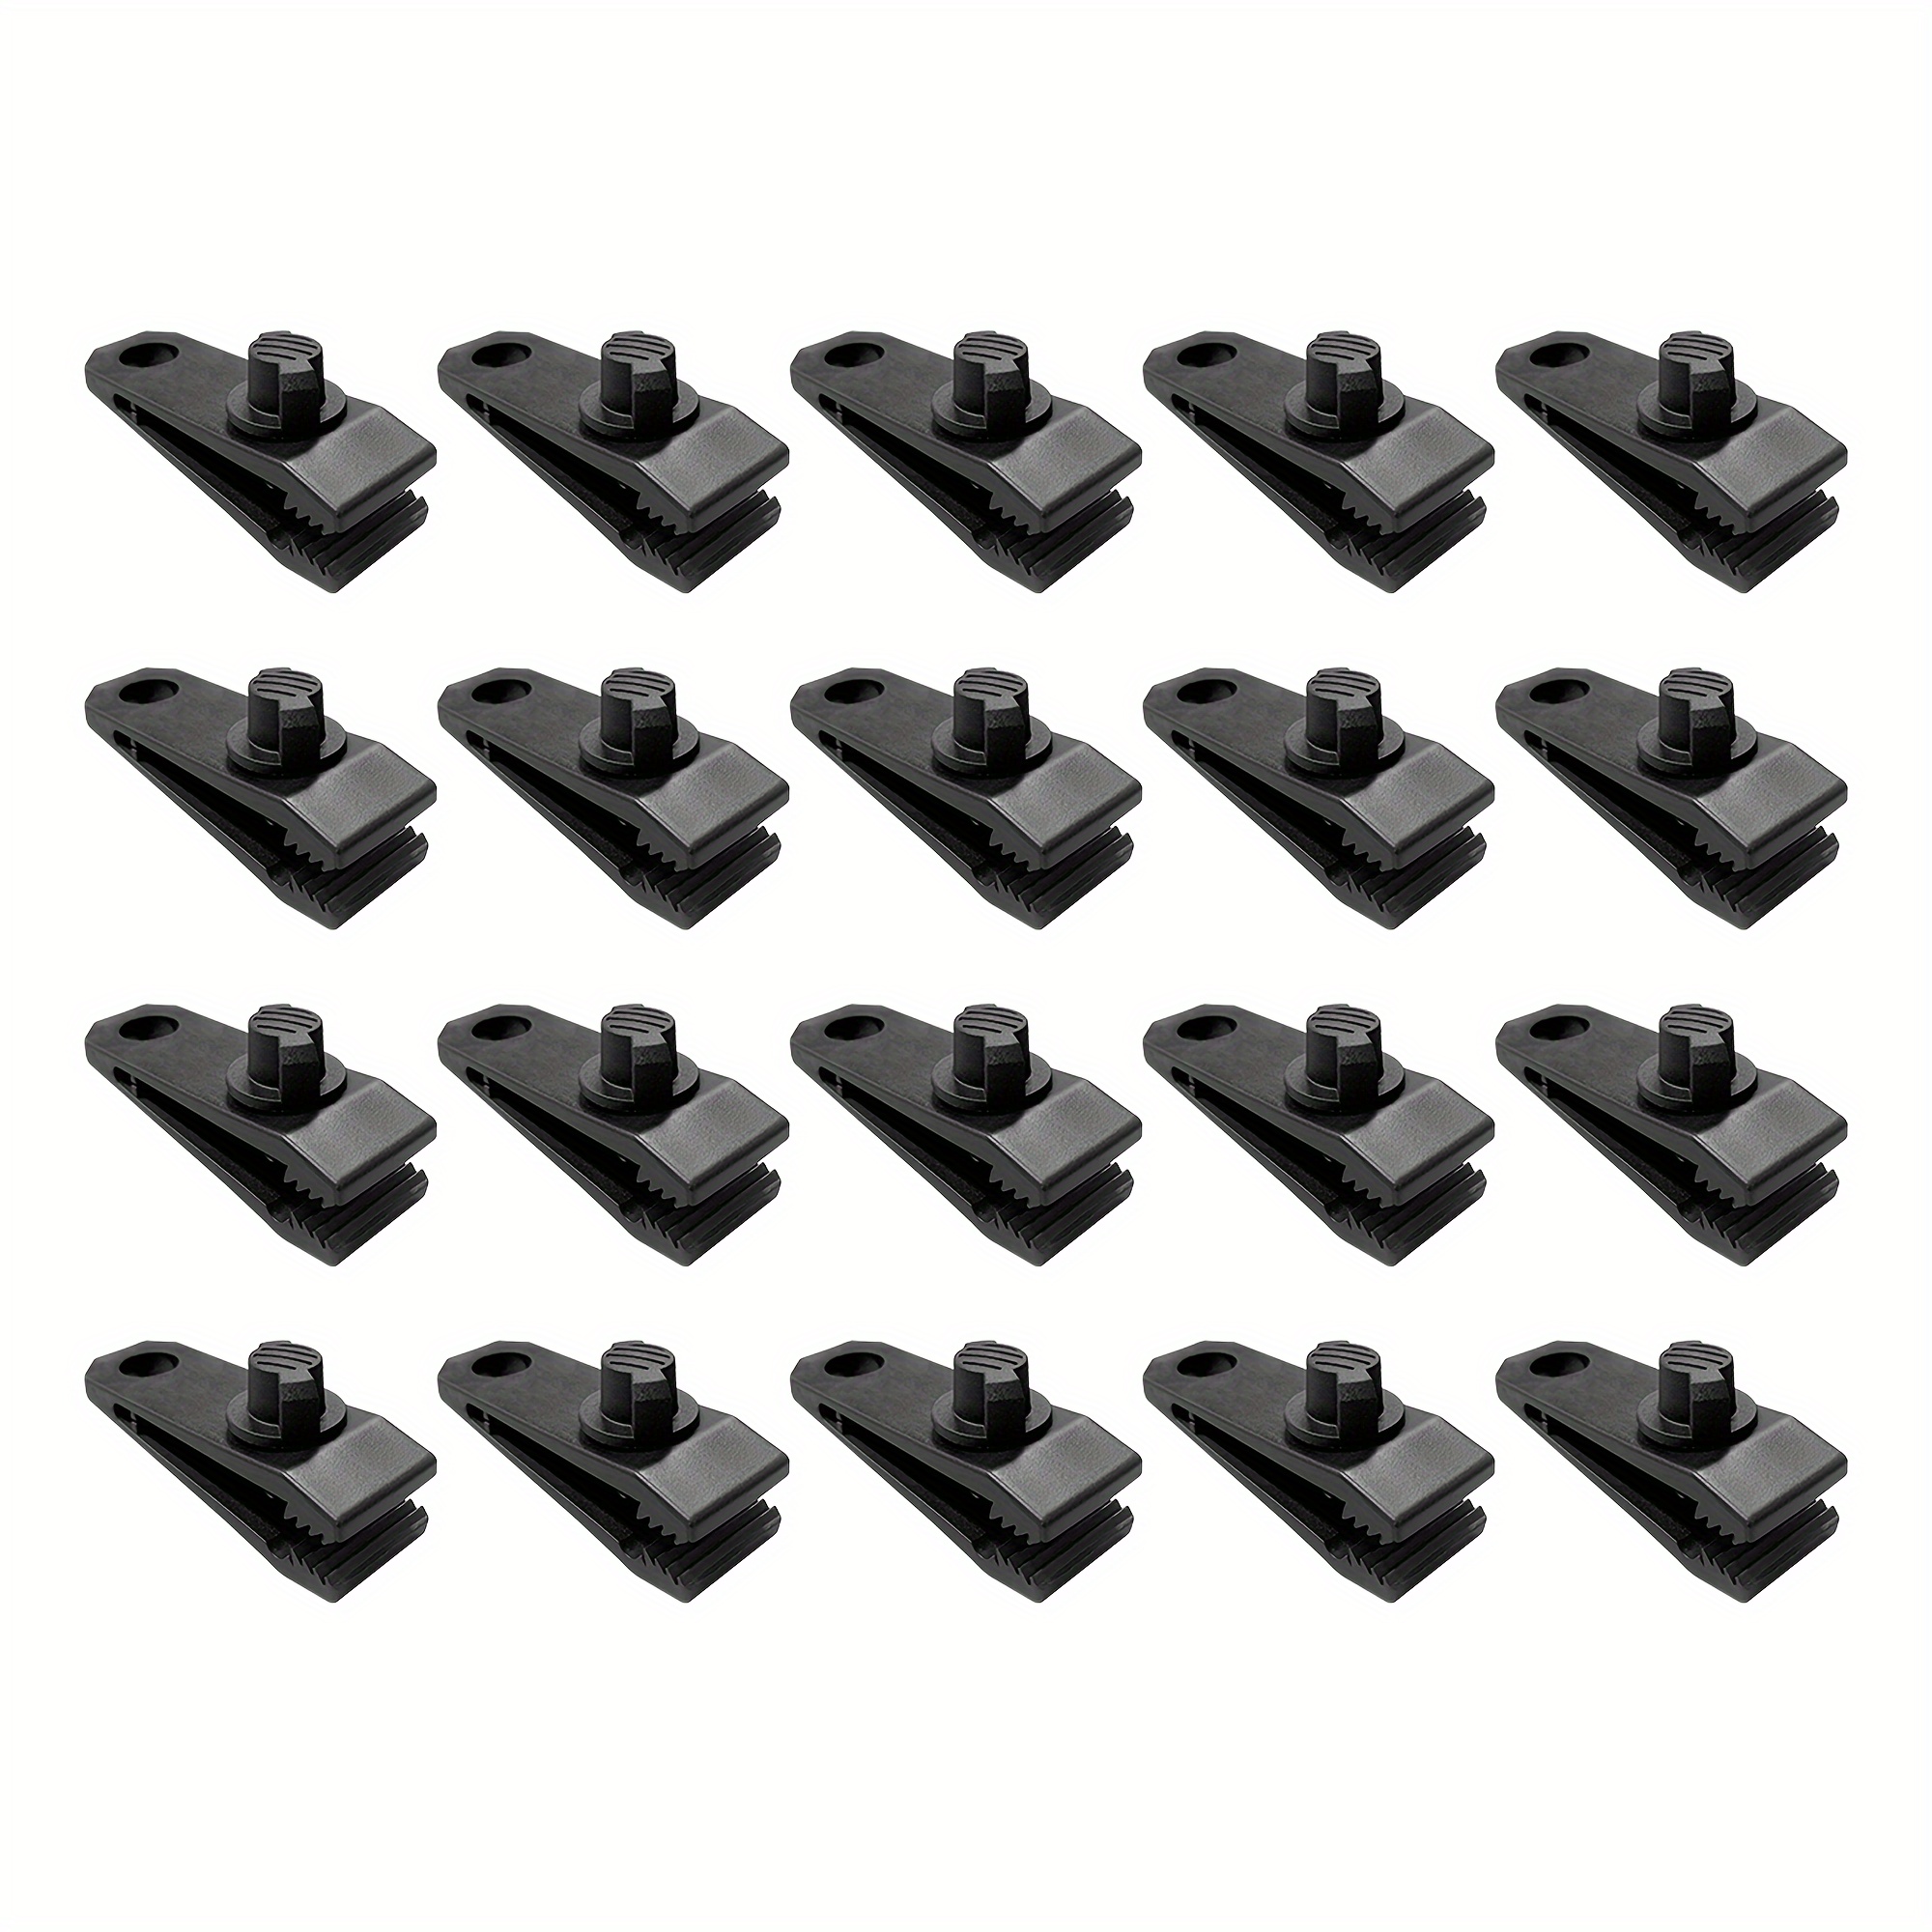 

20/30pcs Tarp Clips Heavy Duty Locking Clip, Thumb Screw Tent Clip, Fixing Tarp Awning Clip, For Camping Tarp Awning Canopy Car Cover Swimming Pool Cover Boat Cover Etc.